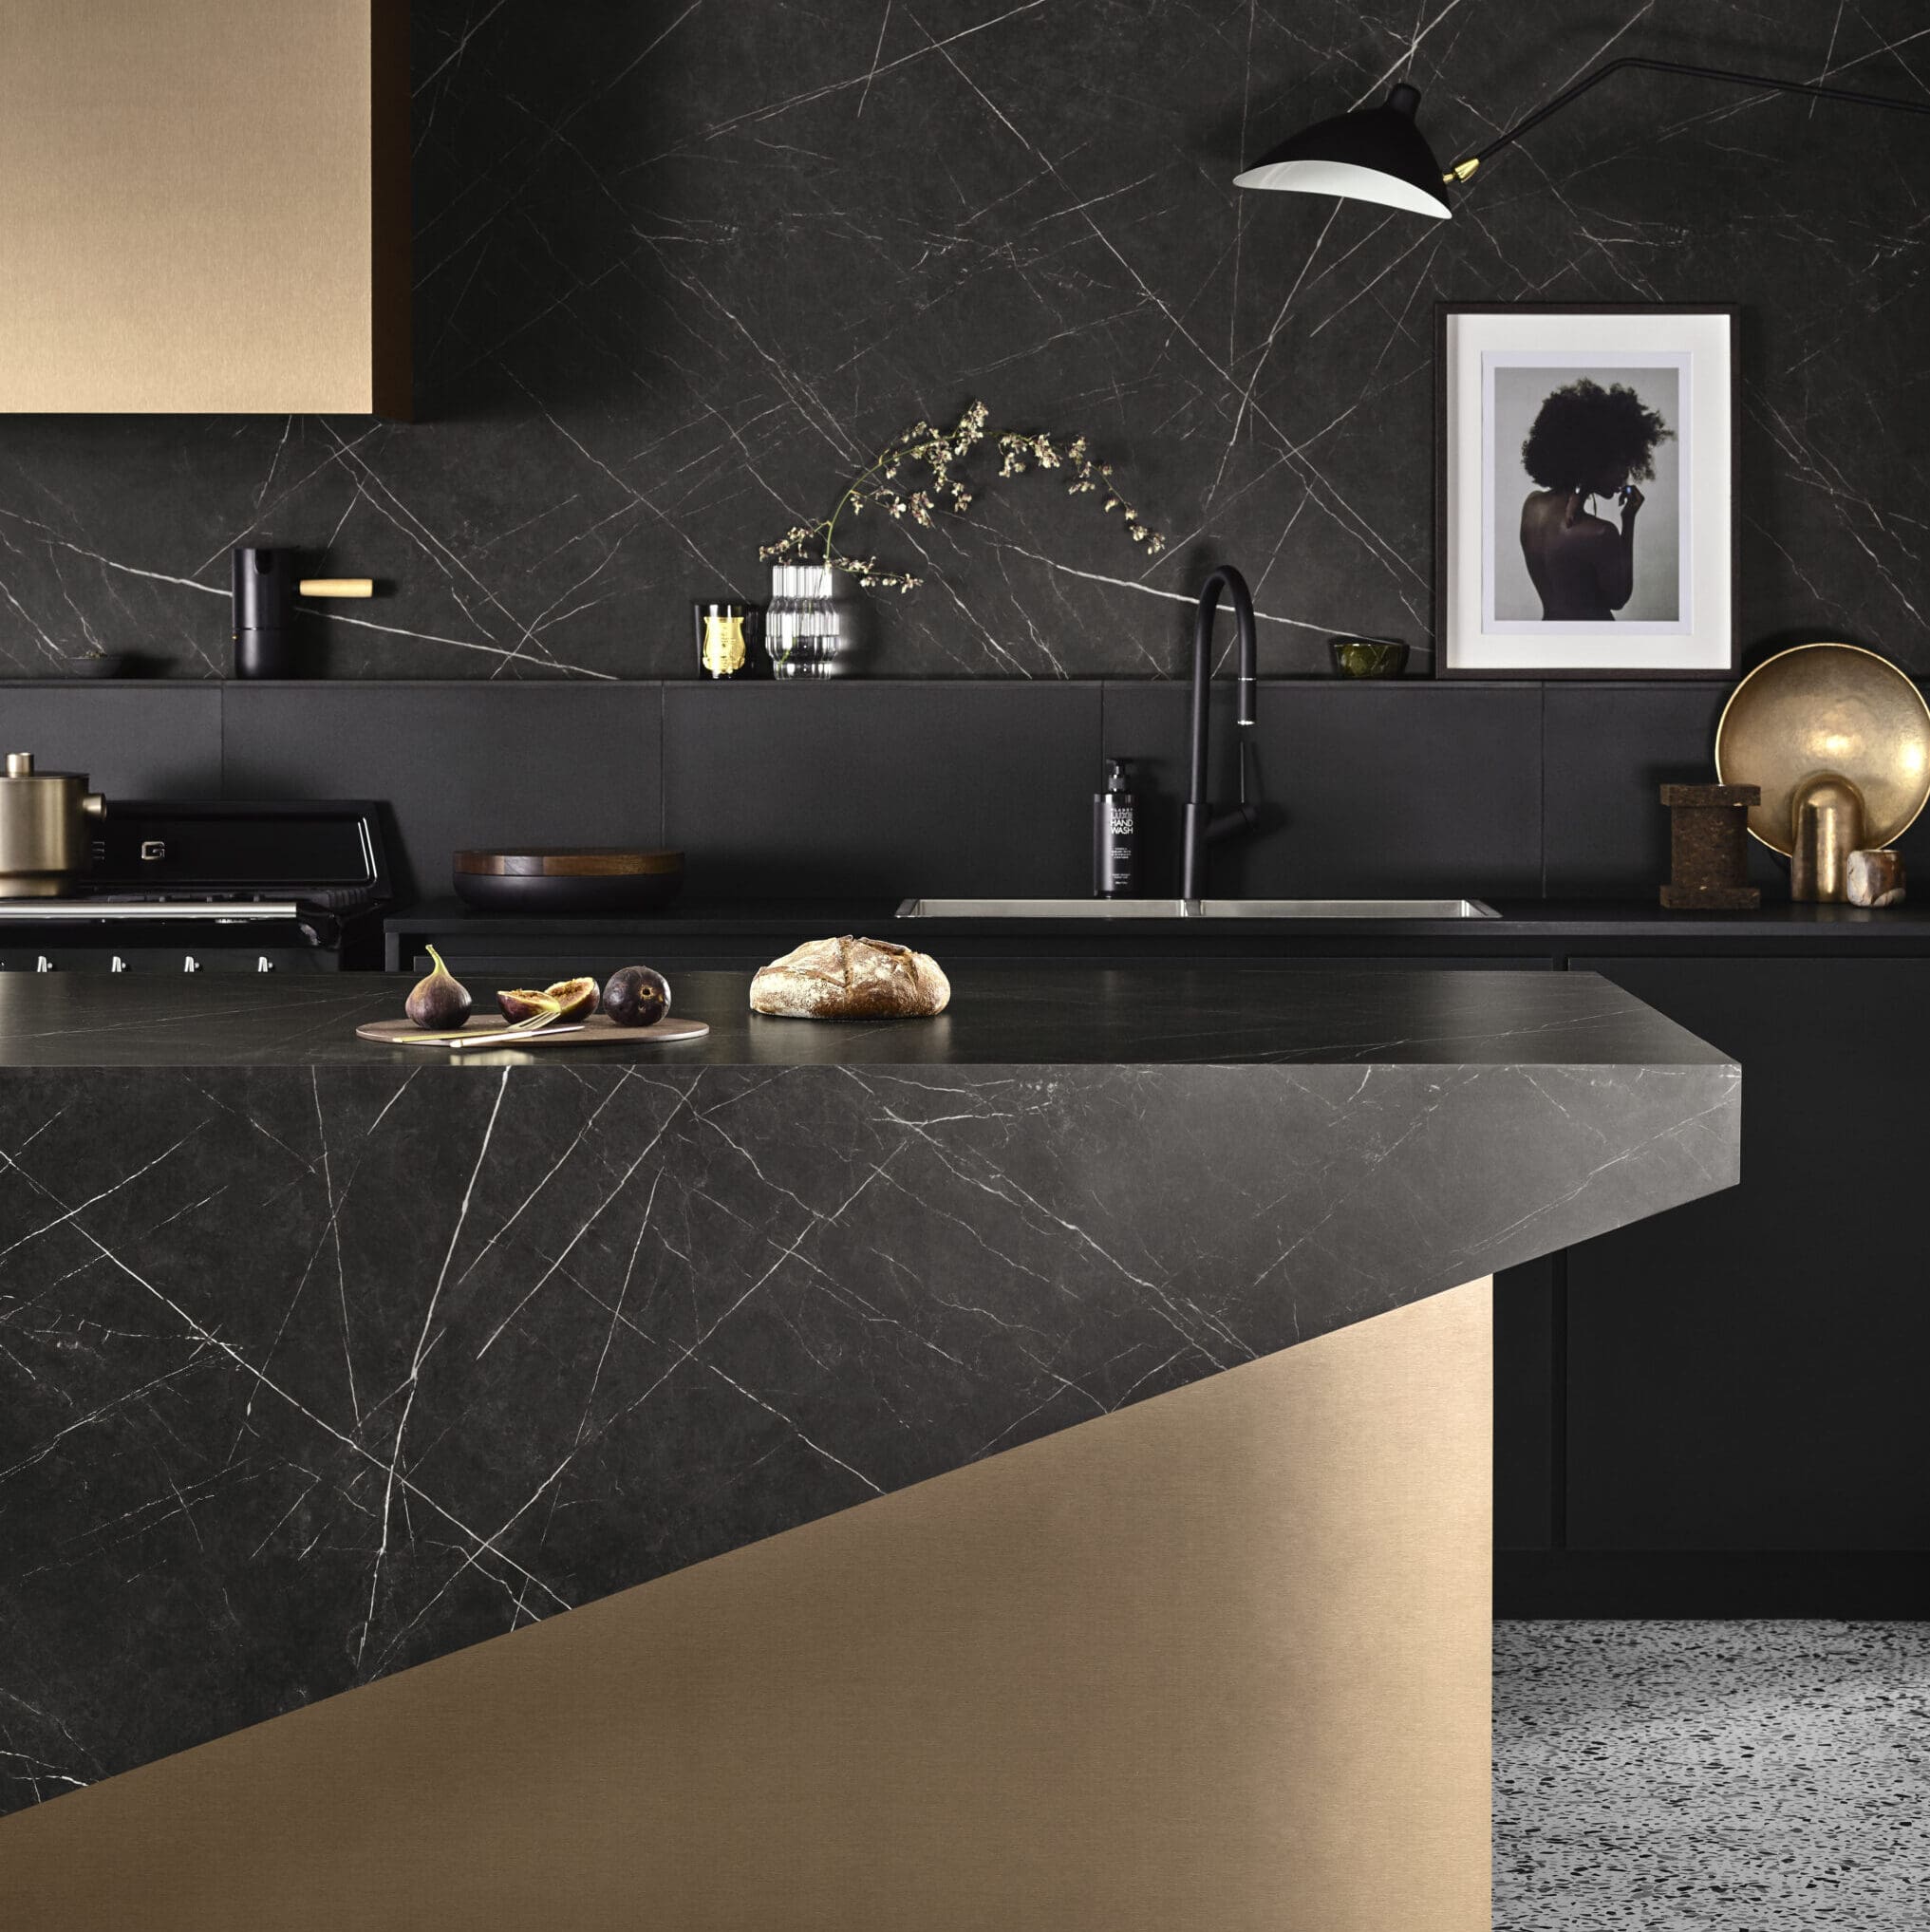 180fx, a revolution in surfacing with true-to-scale granite patterns that offer visual drama unmatched by any other laminates